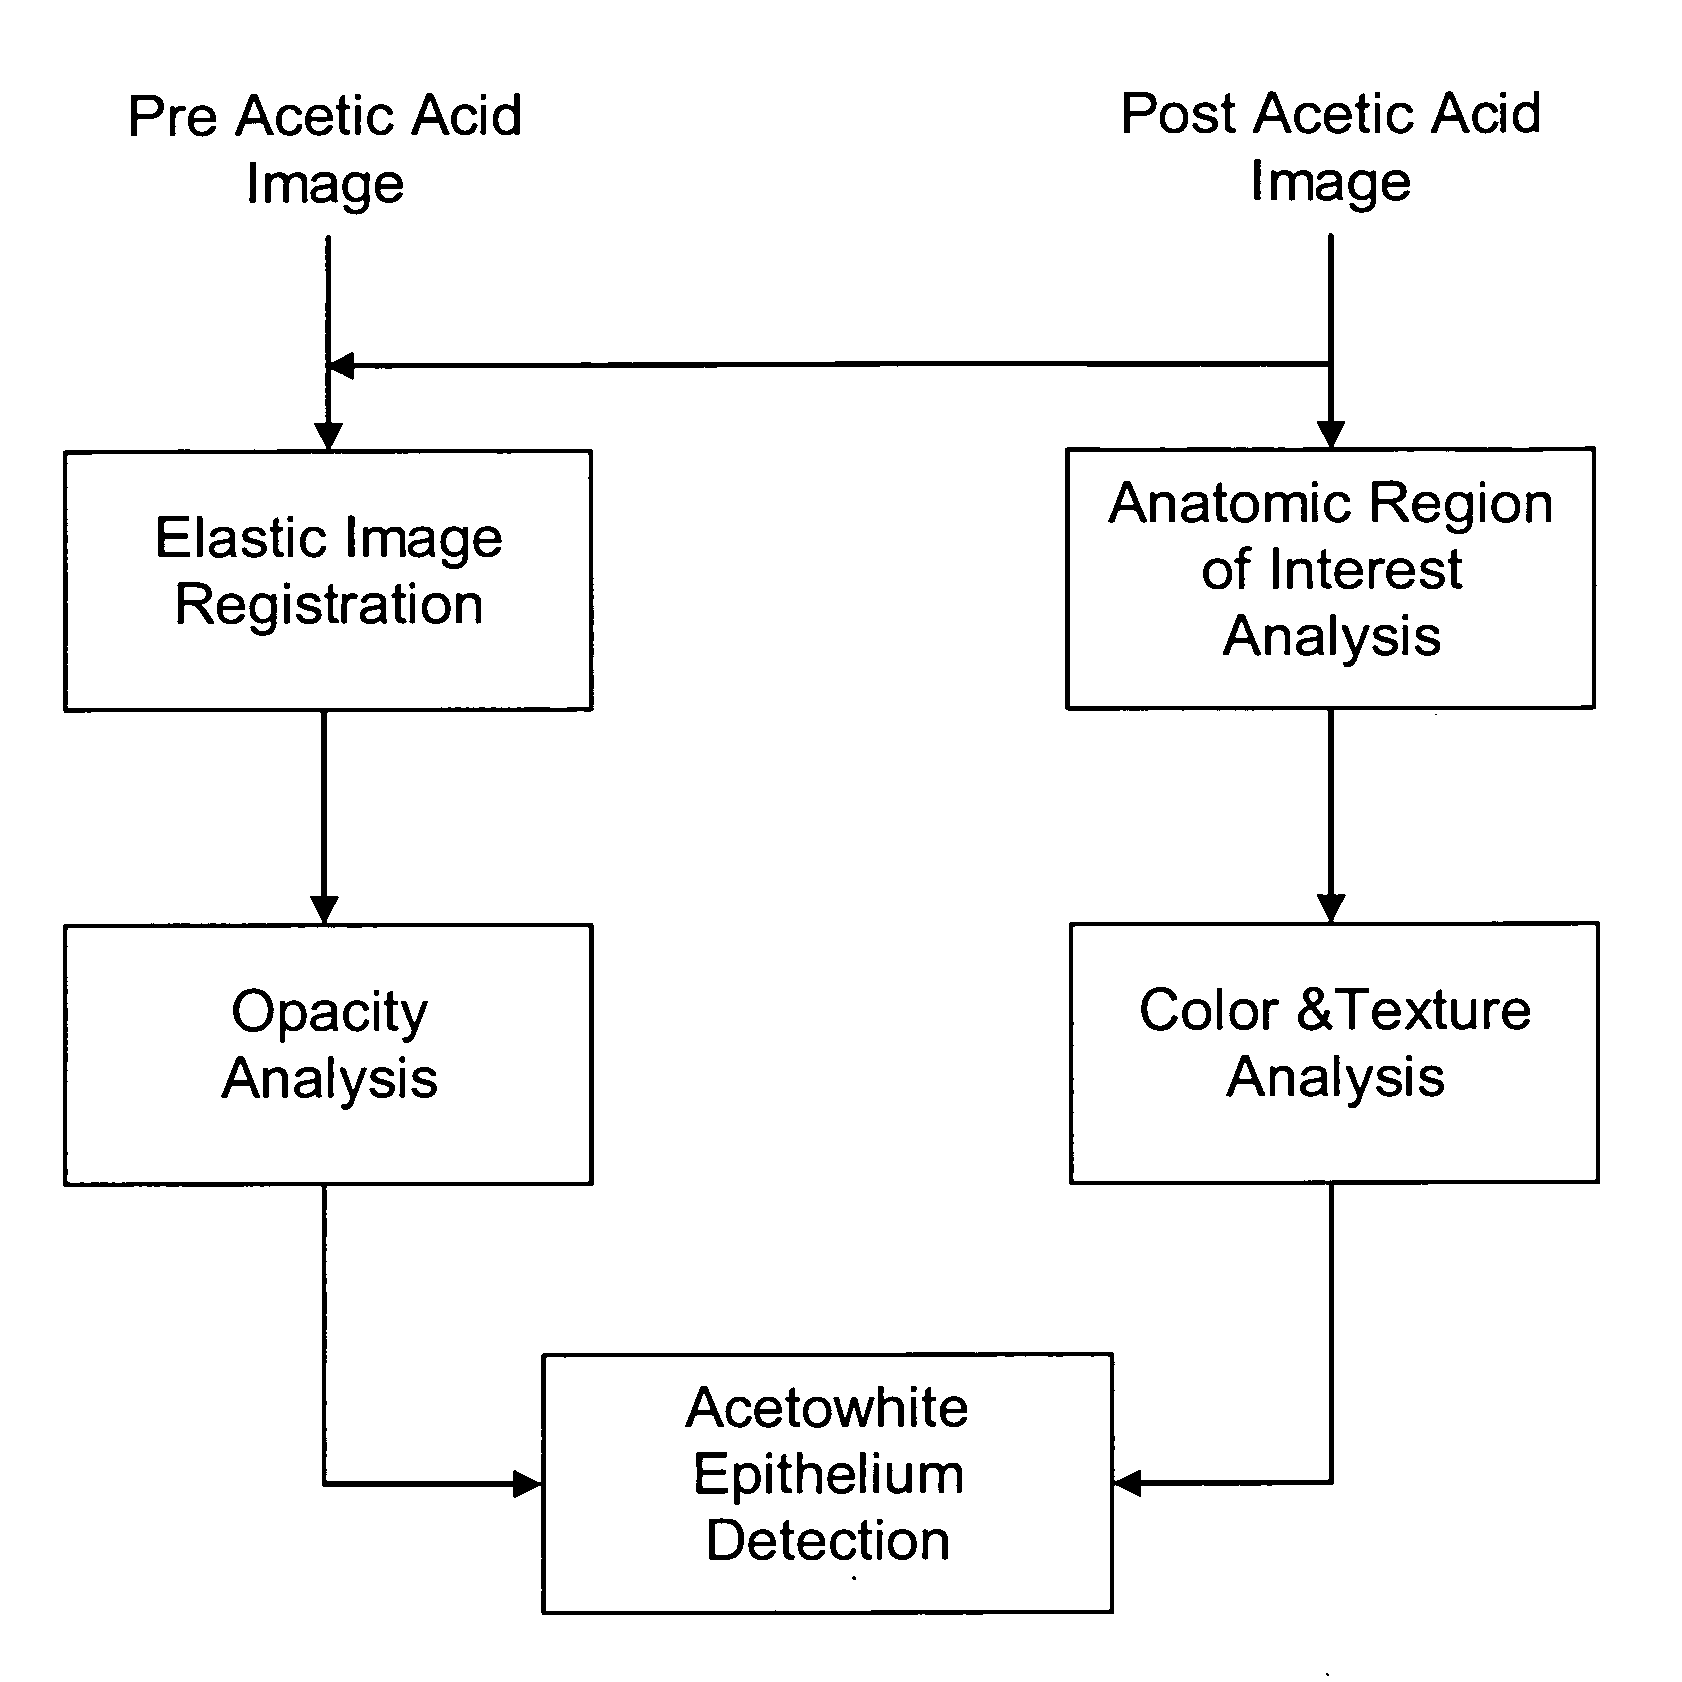 Computerized image analysis for acetic acid induced Cervical Intraepithelial Neoplasia